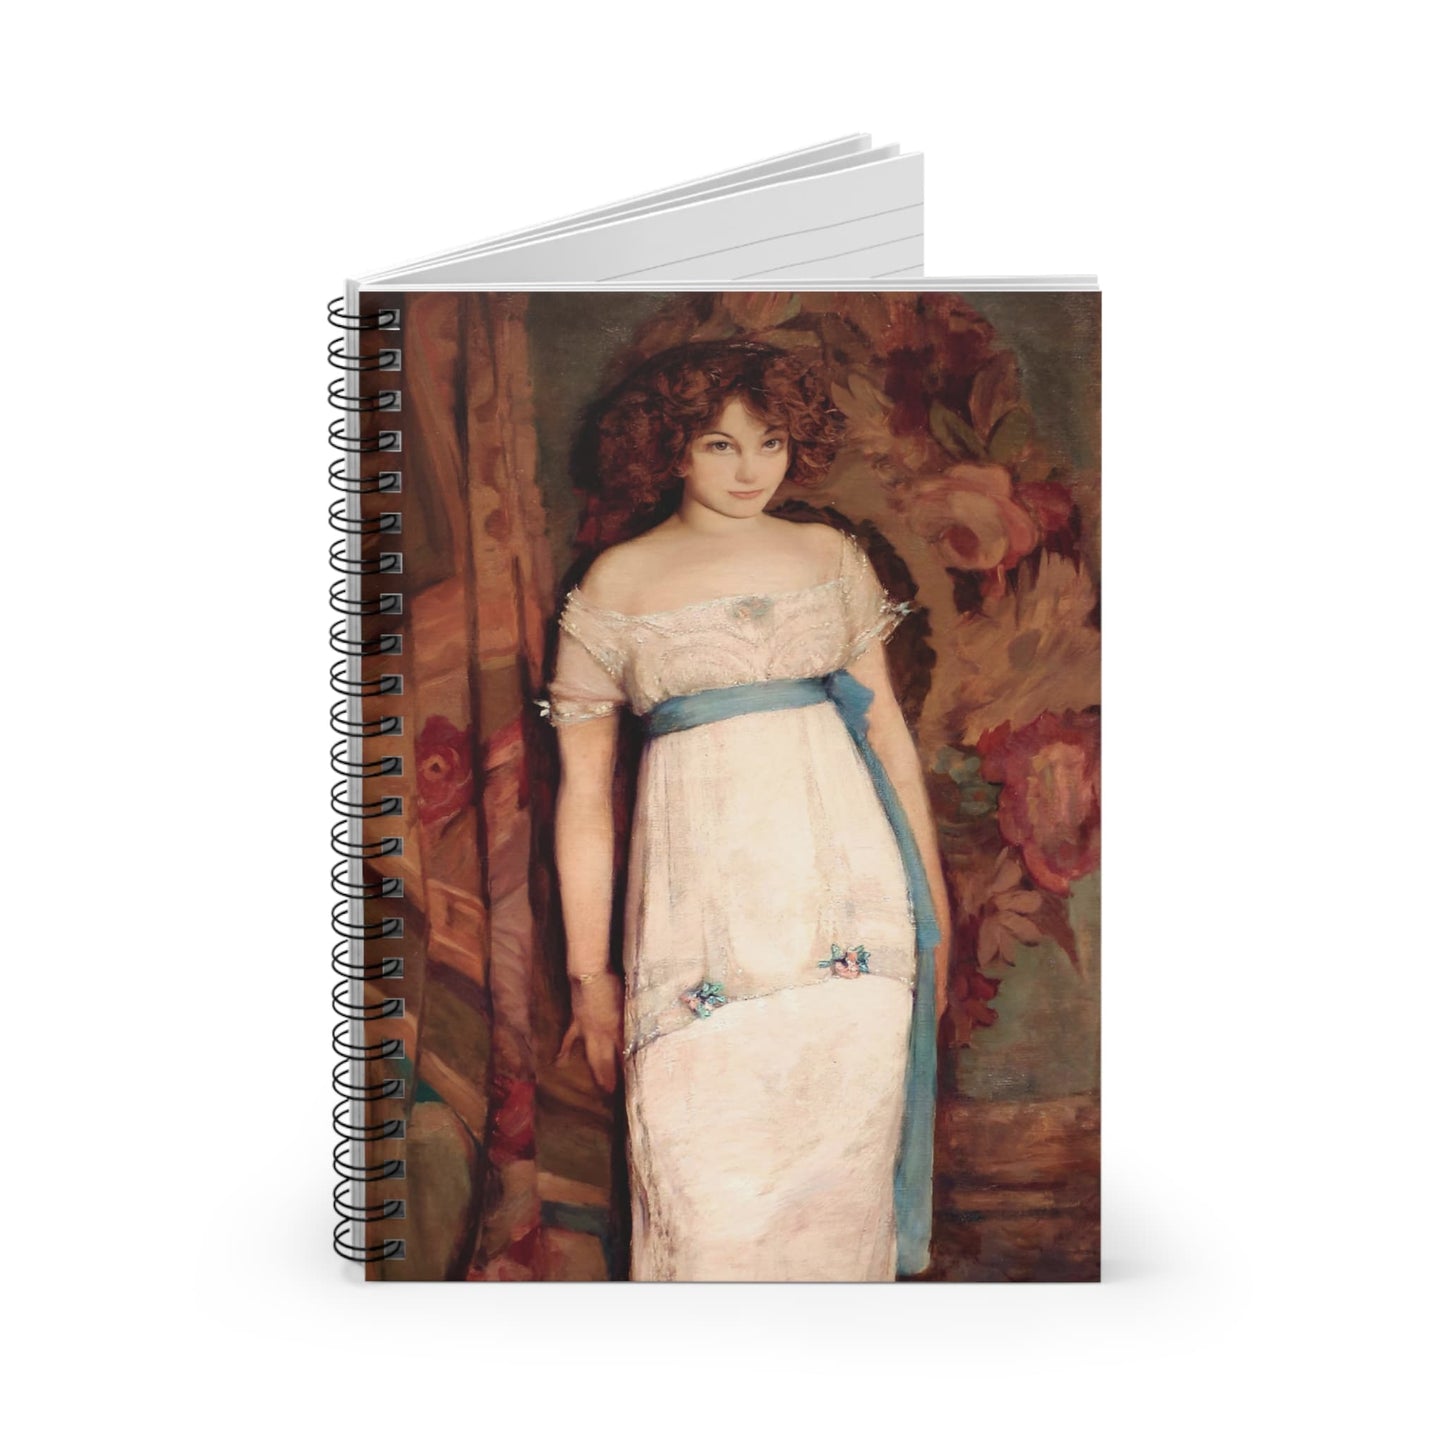 Young Maiden Spiral Notebook Standing up on White Desk